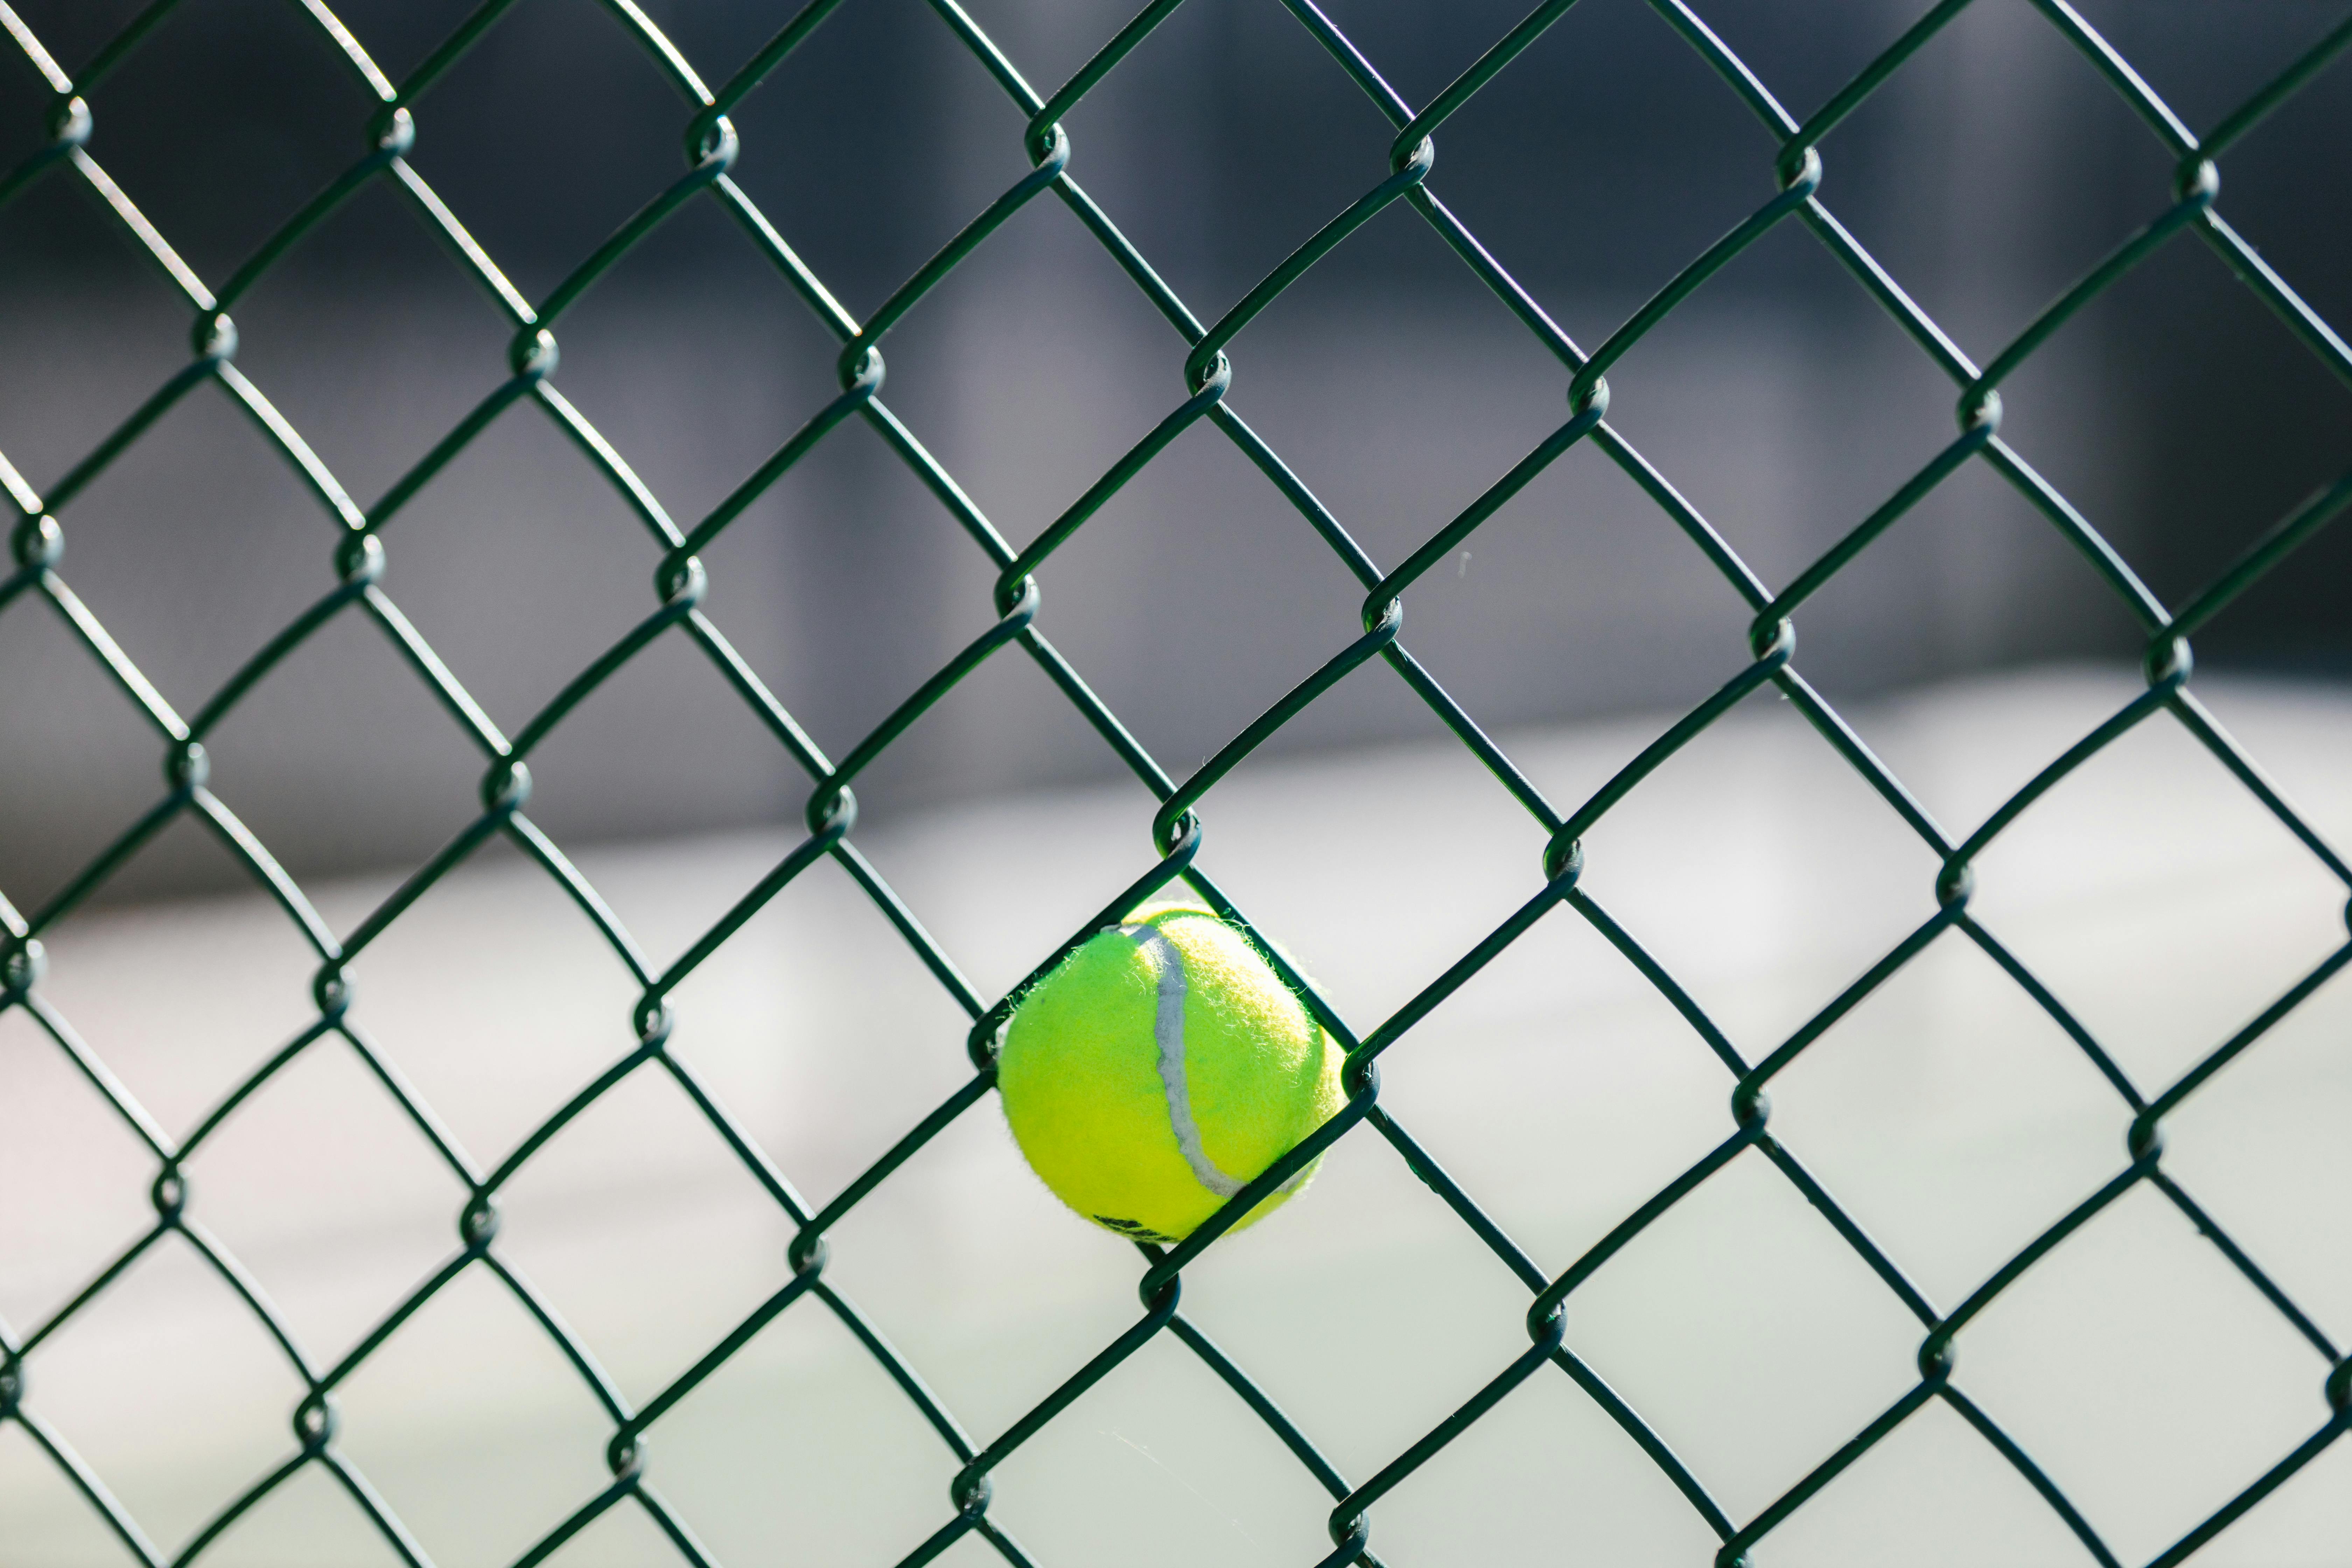 close up view of a tennis ball on a wire fence